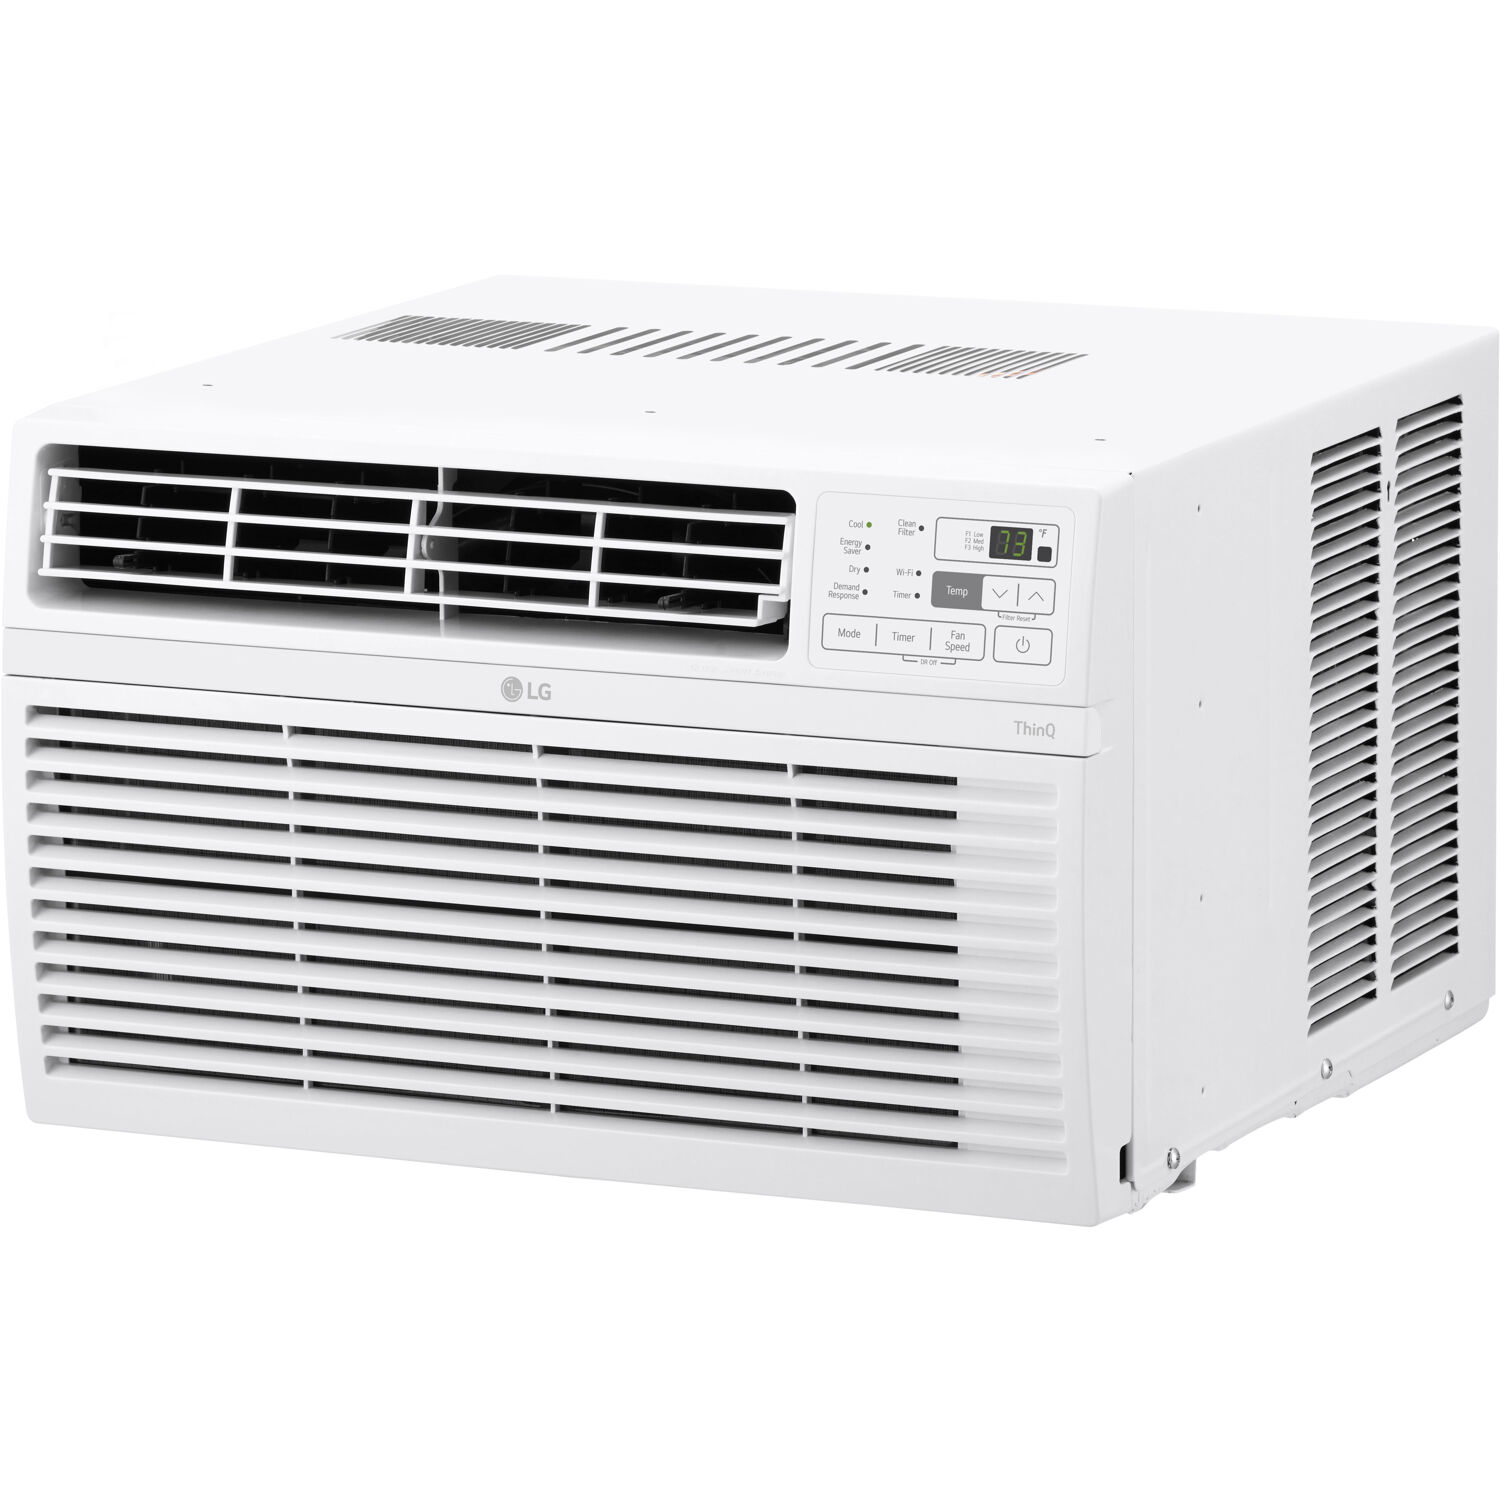 LG 8,000 BTU 115V Window-Mounted Air Conditioner with Wi-Fi Control - image 4 of 11